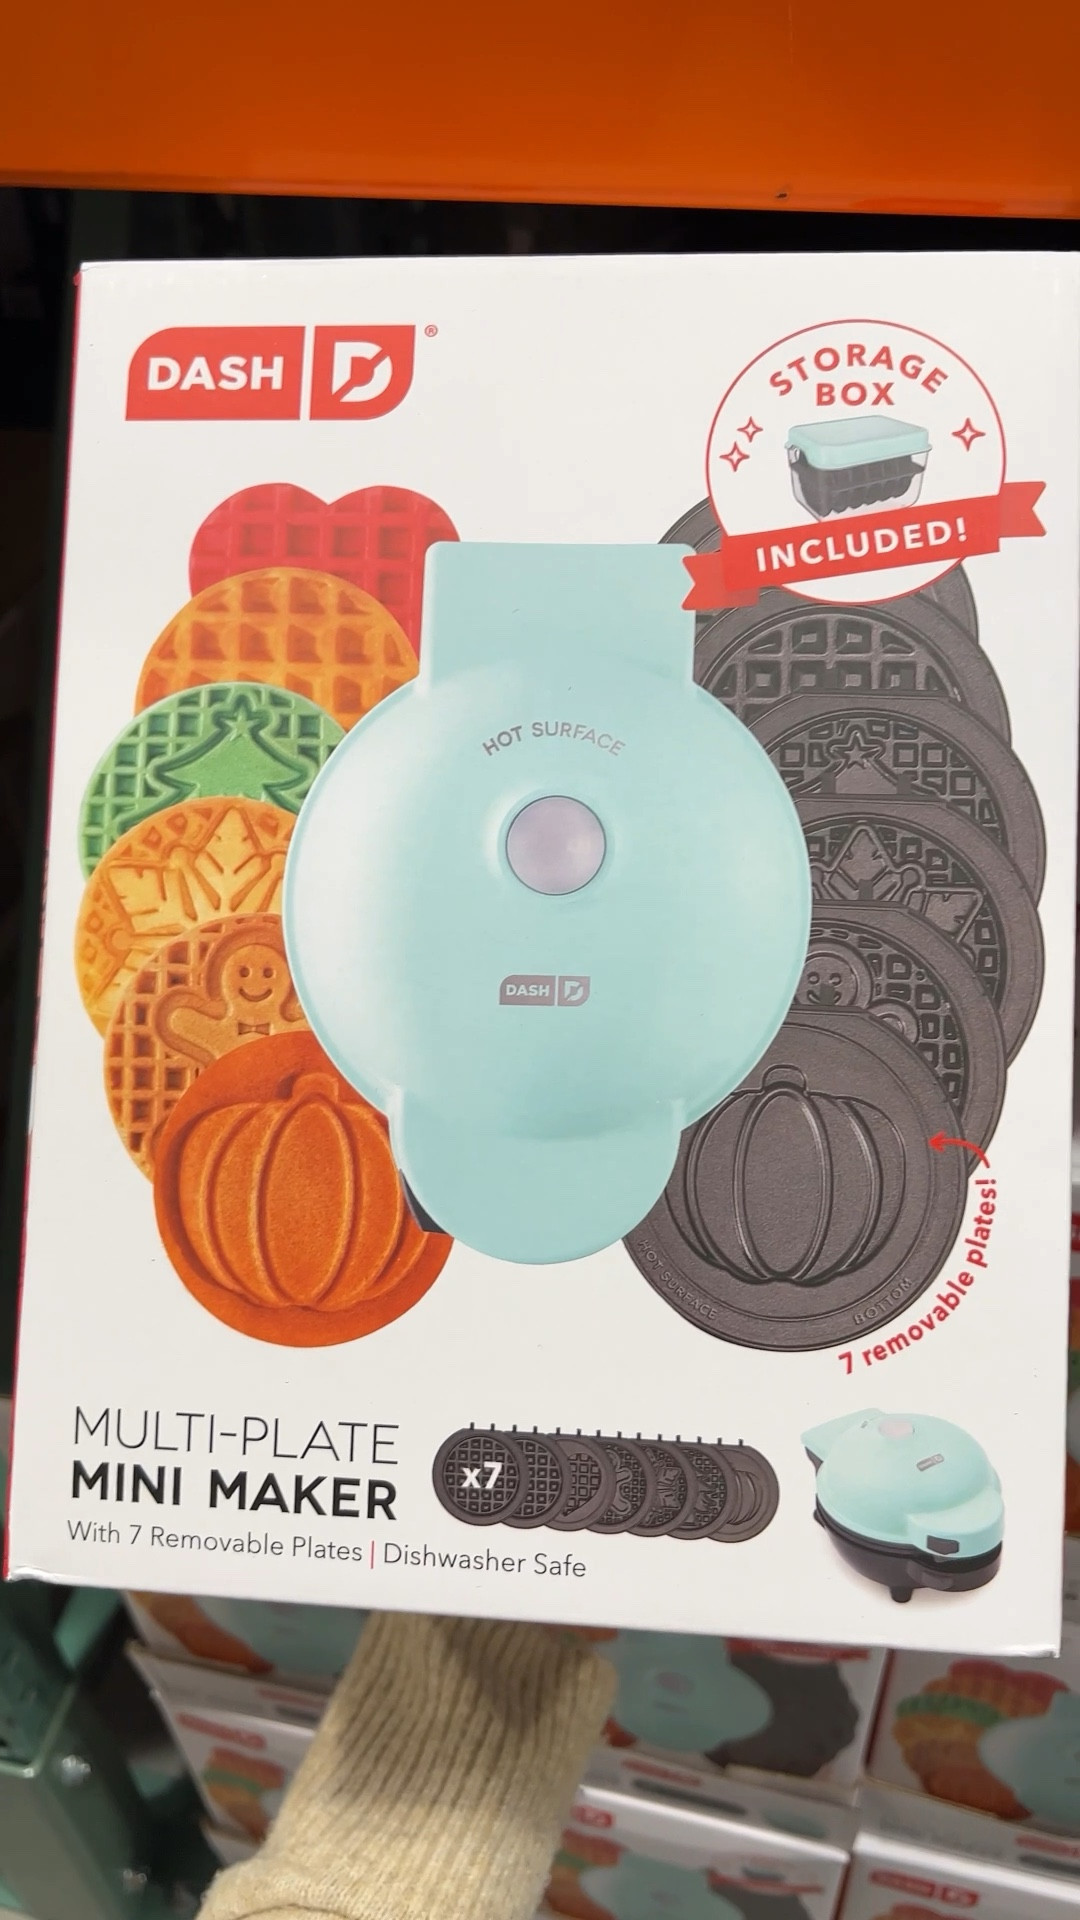  Multi-Plate Mini Maker with Removable Plates and